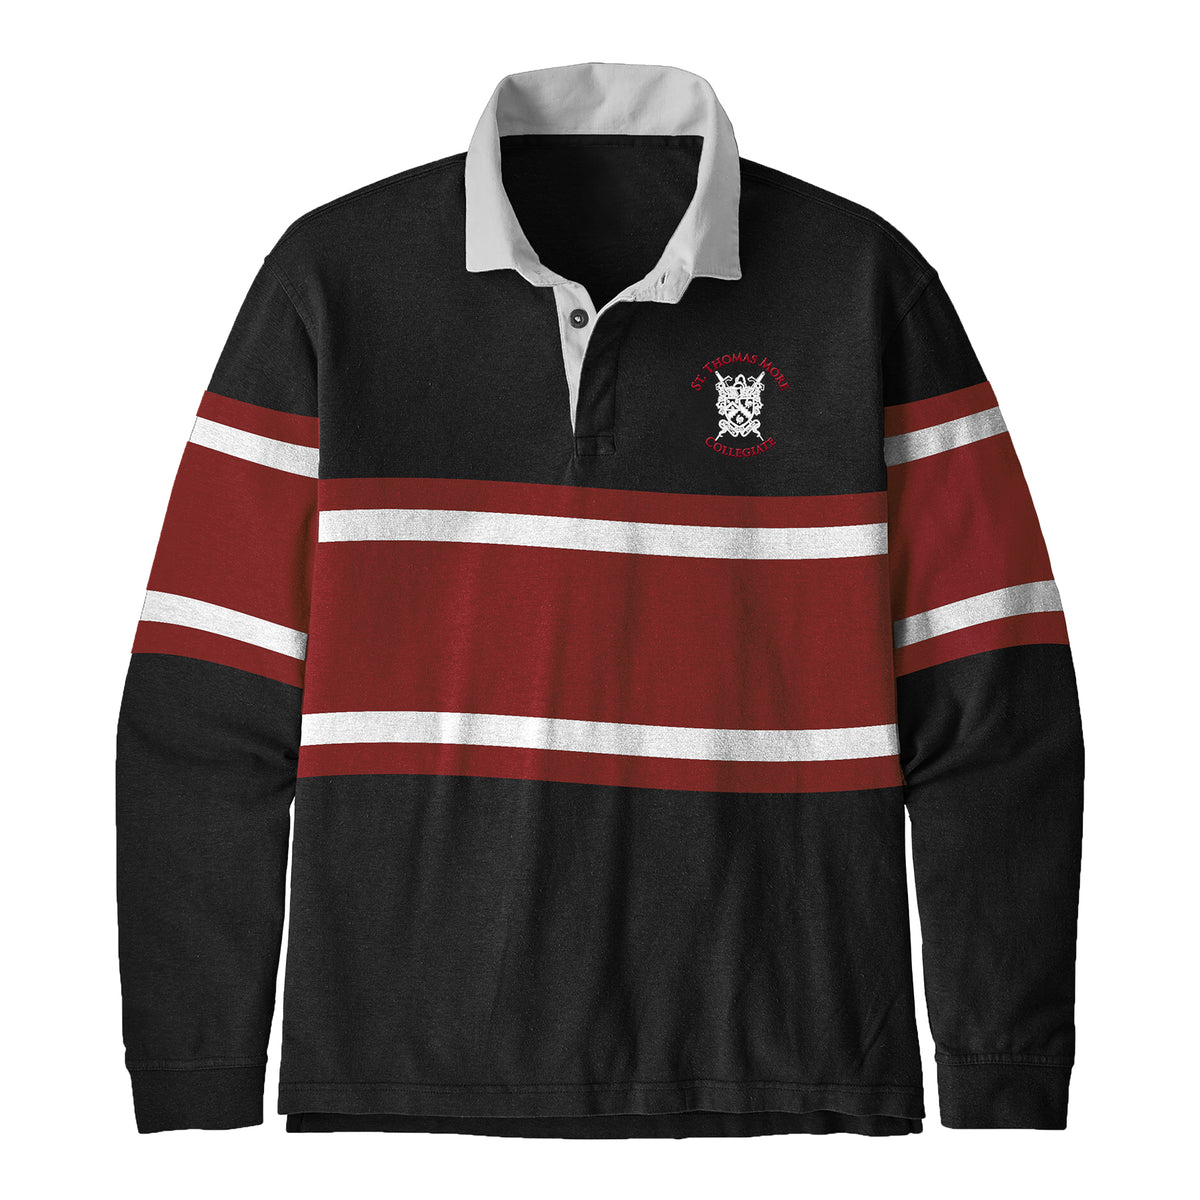 *ST. THOMAS MORE RUGBY SHIRT